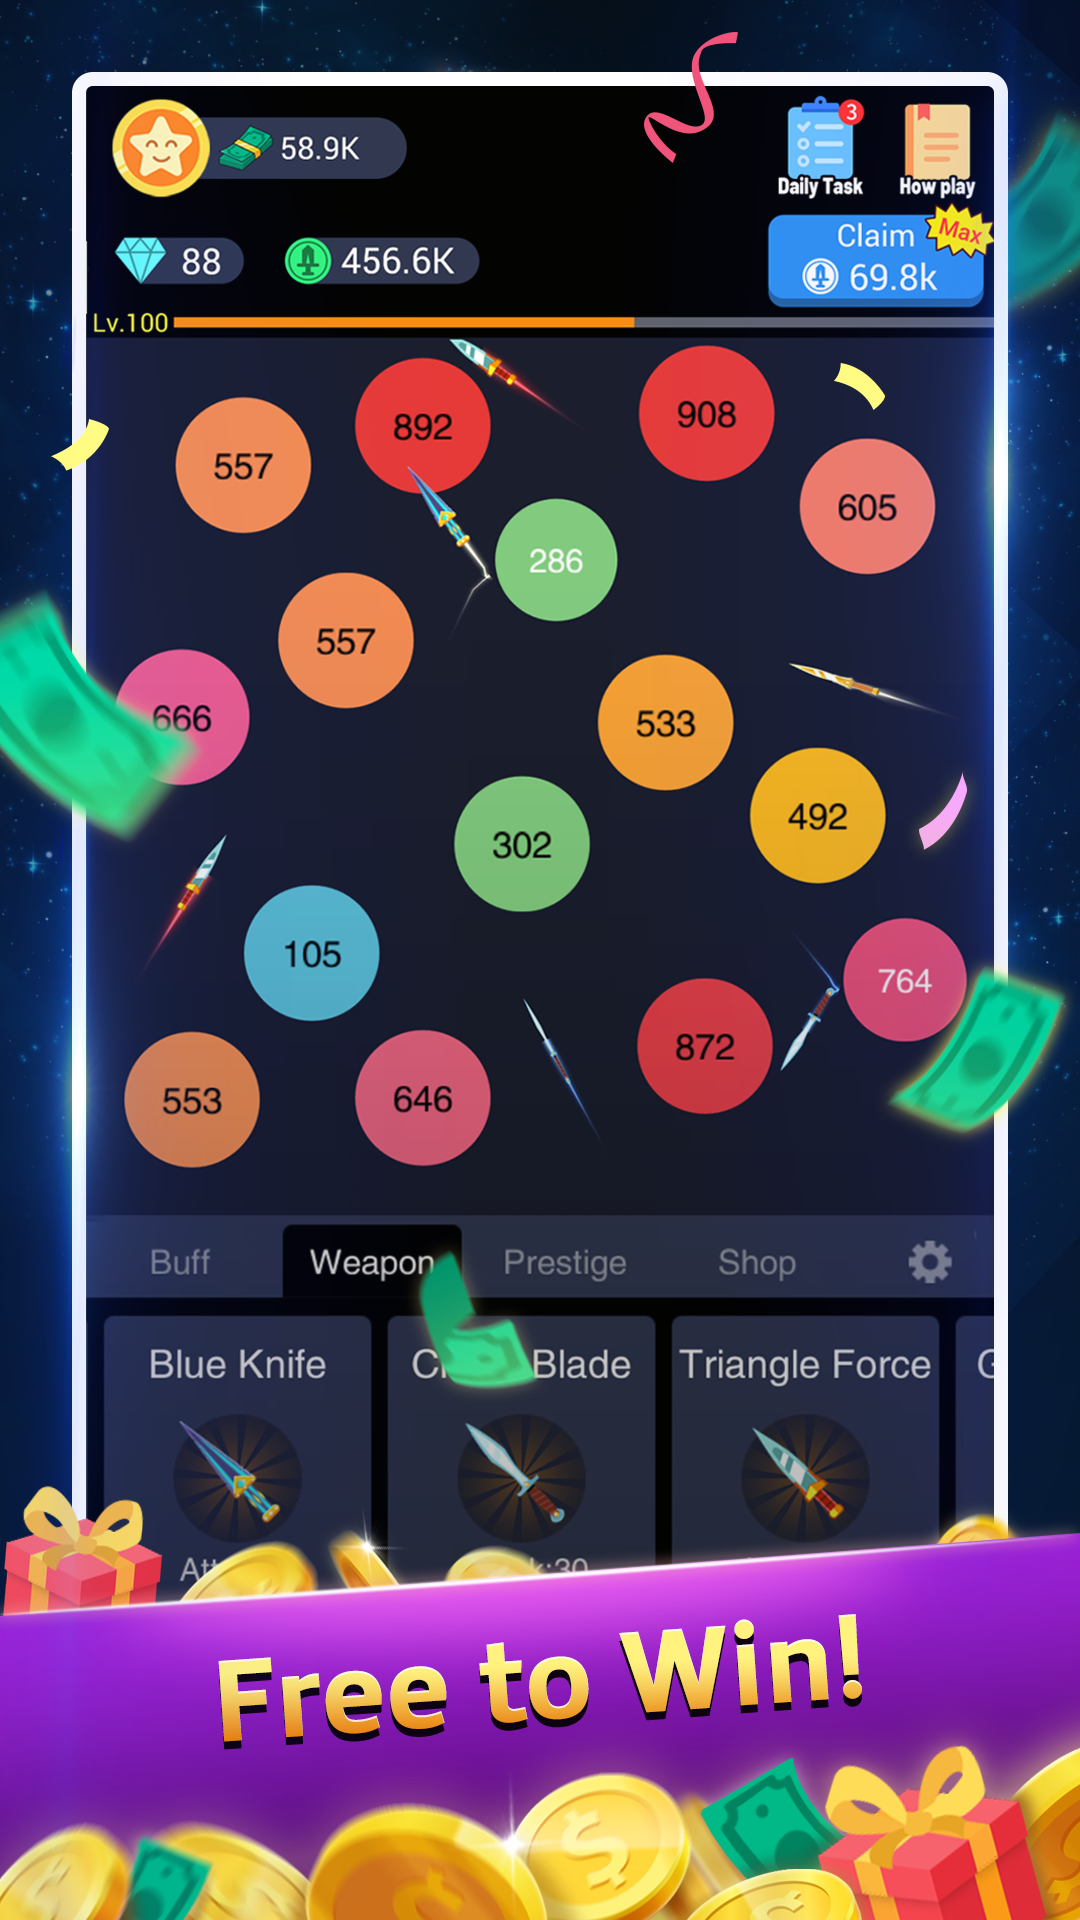 Screenshot of Crazy Knife - Idle to Win